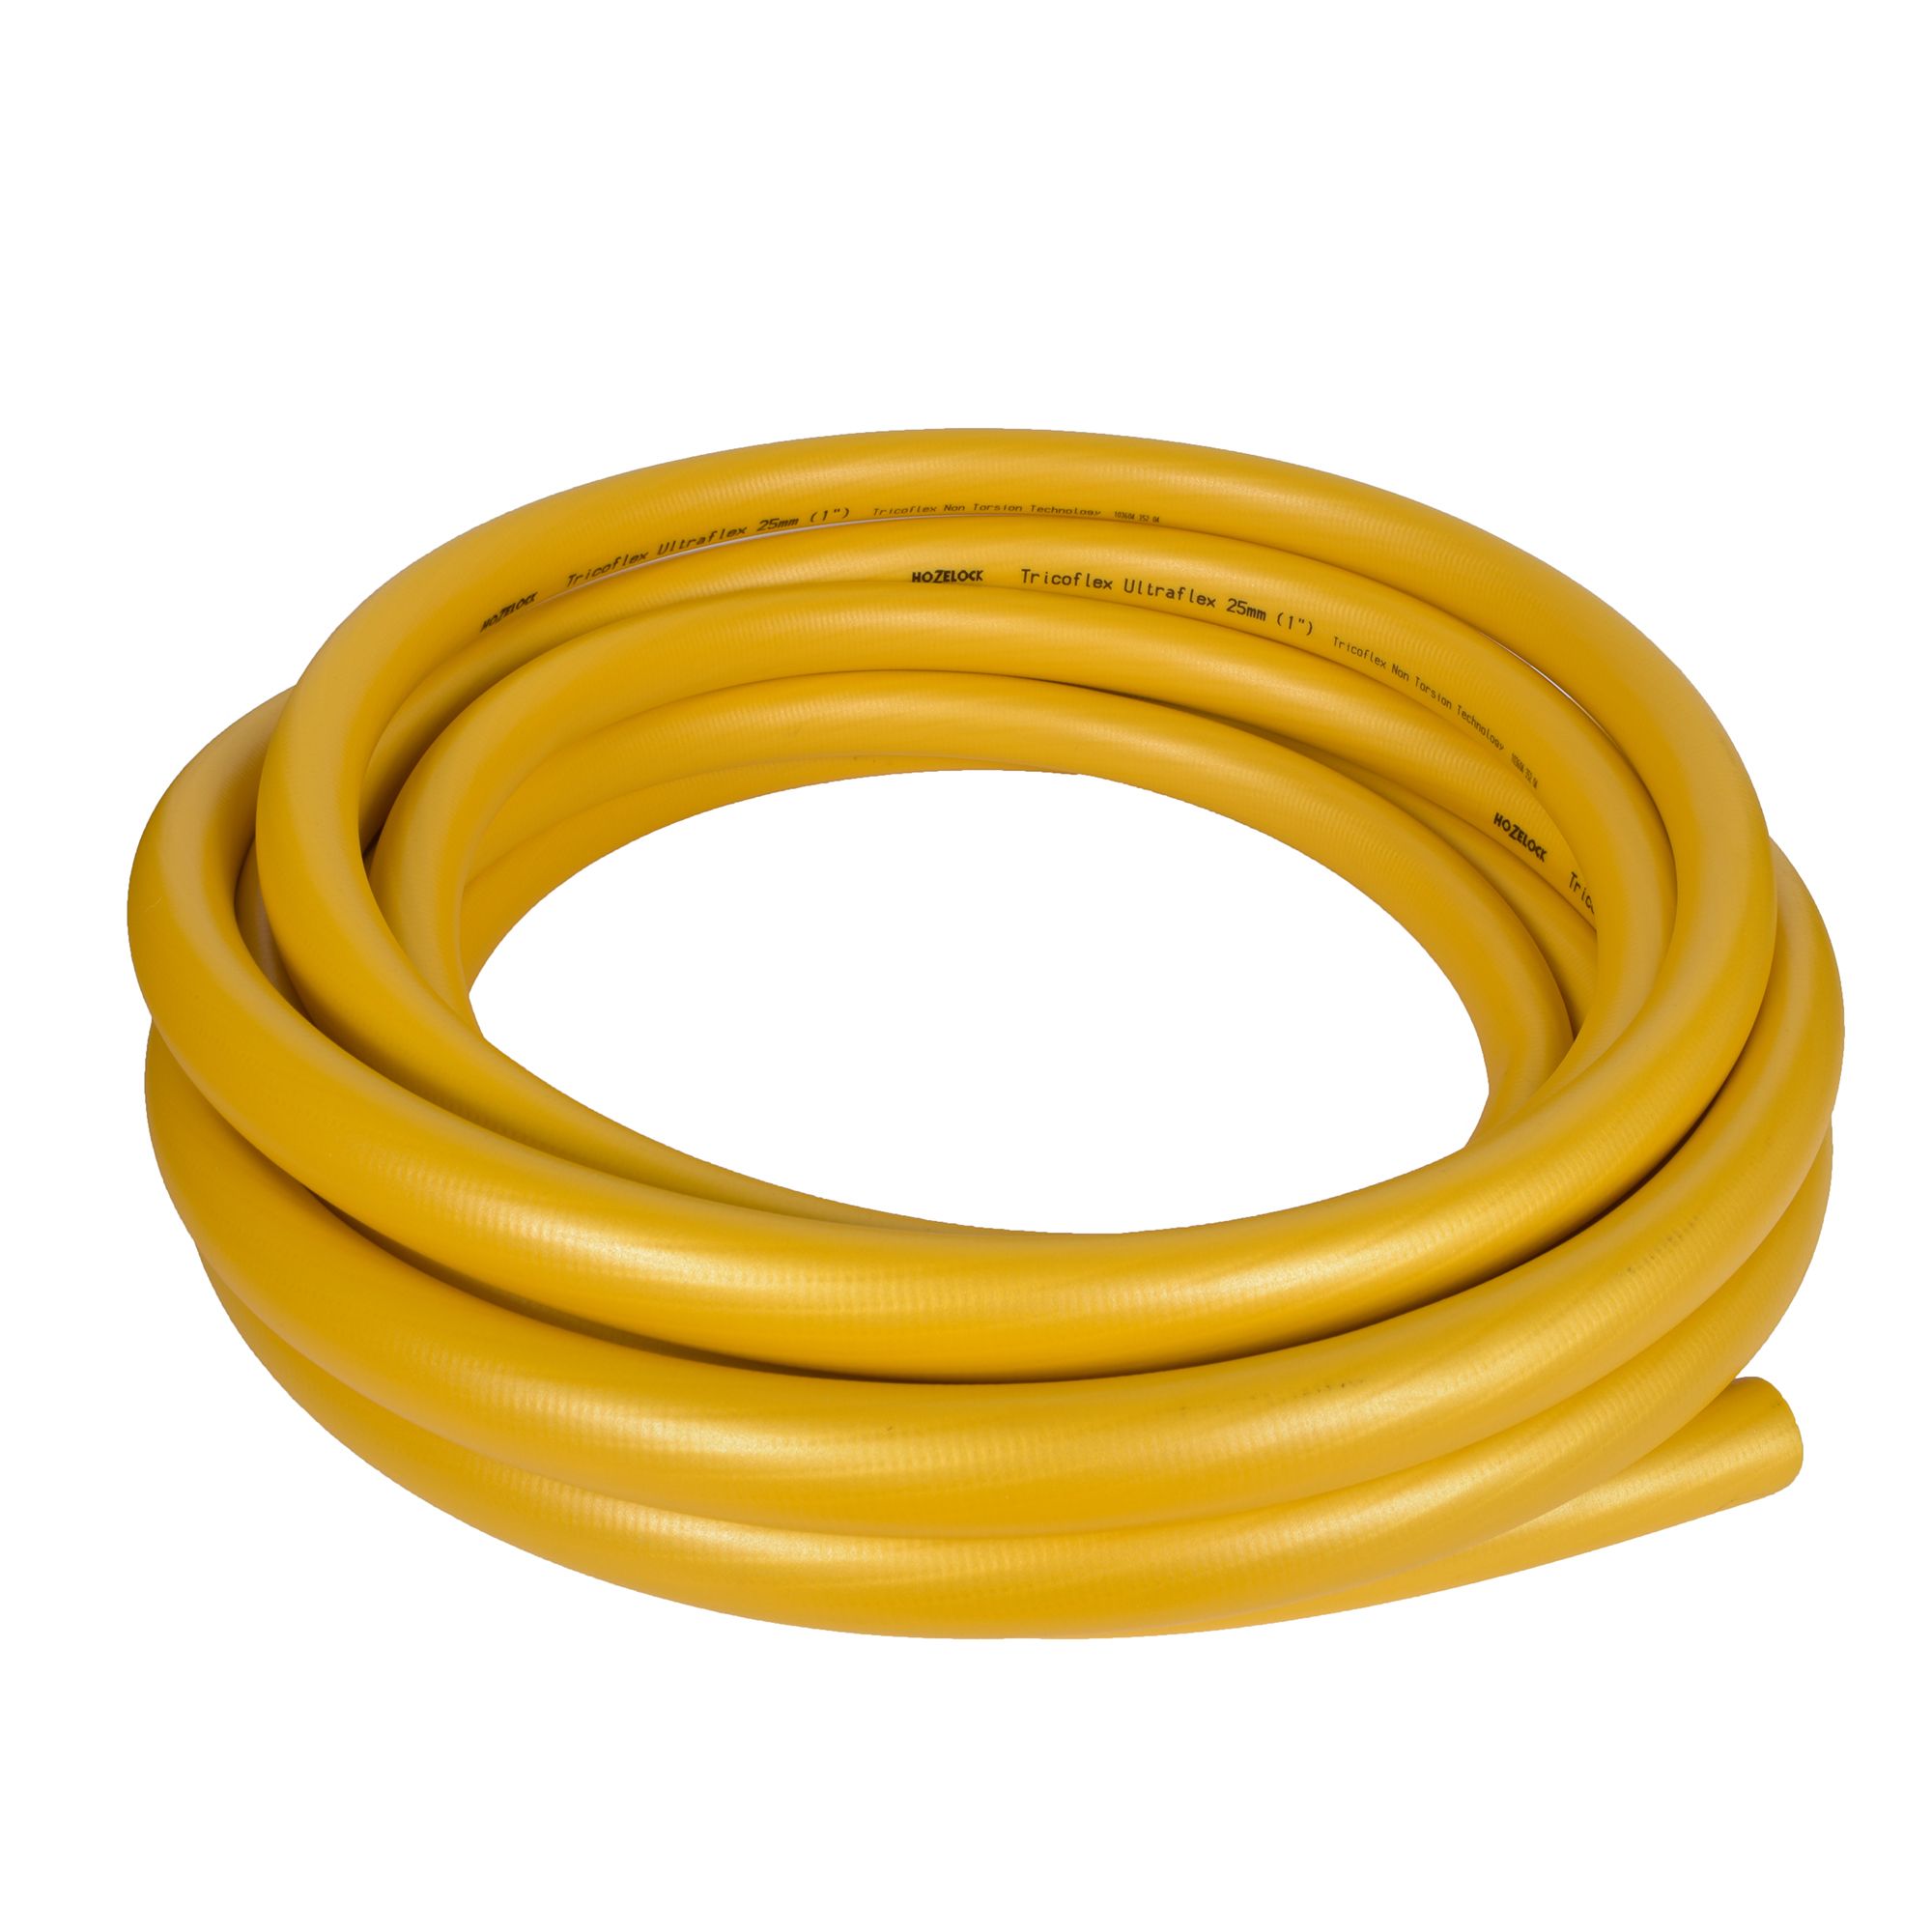 Yellow at reinforced 5-layer Hozelock (L)10m pipe DIY | B&Q 6765 0000 hose